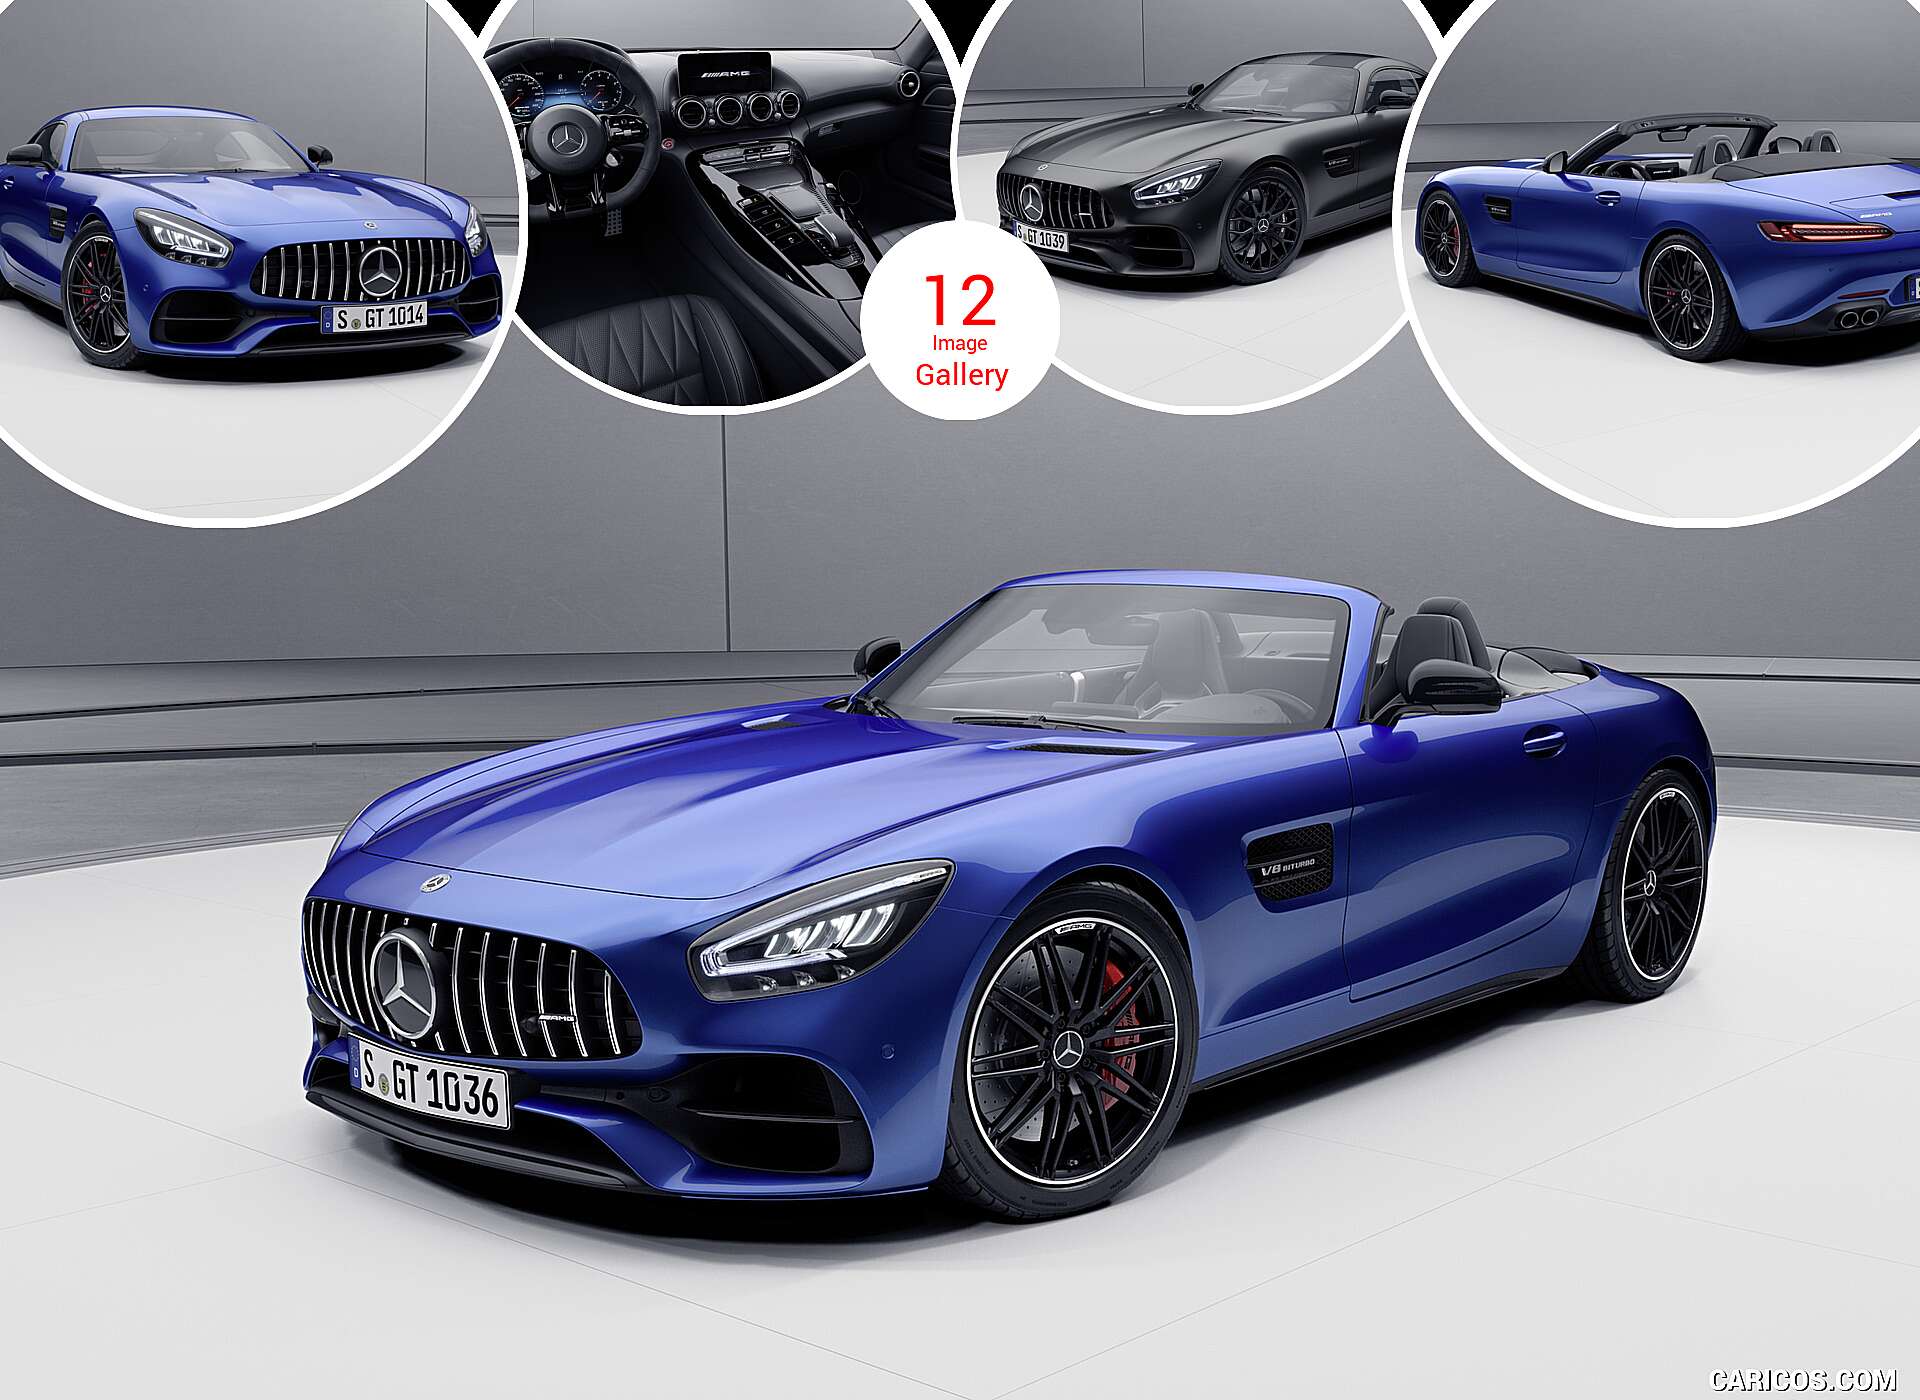 21 Mercedes Amg Gt Coupe And Roadster Caricos Com